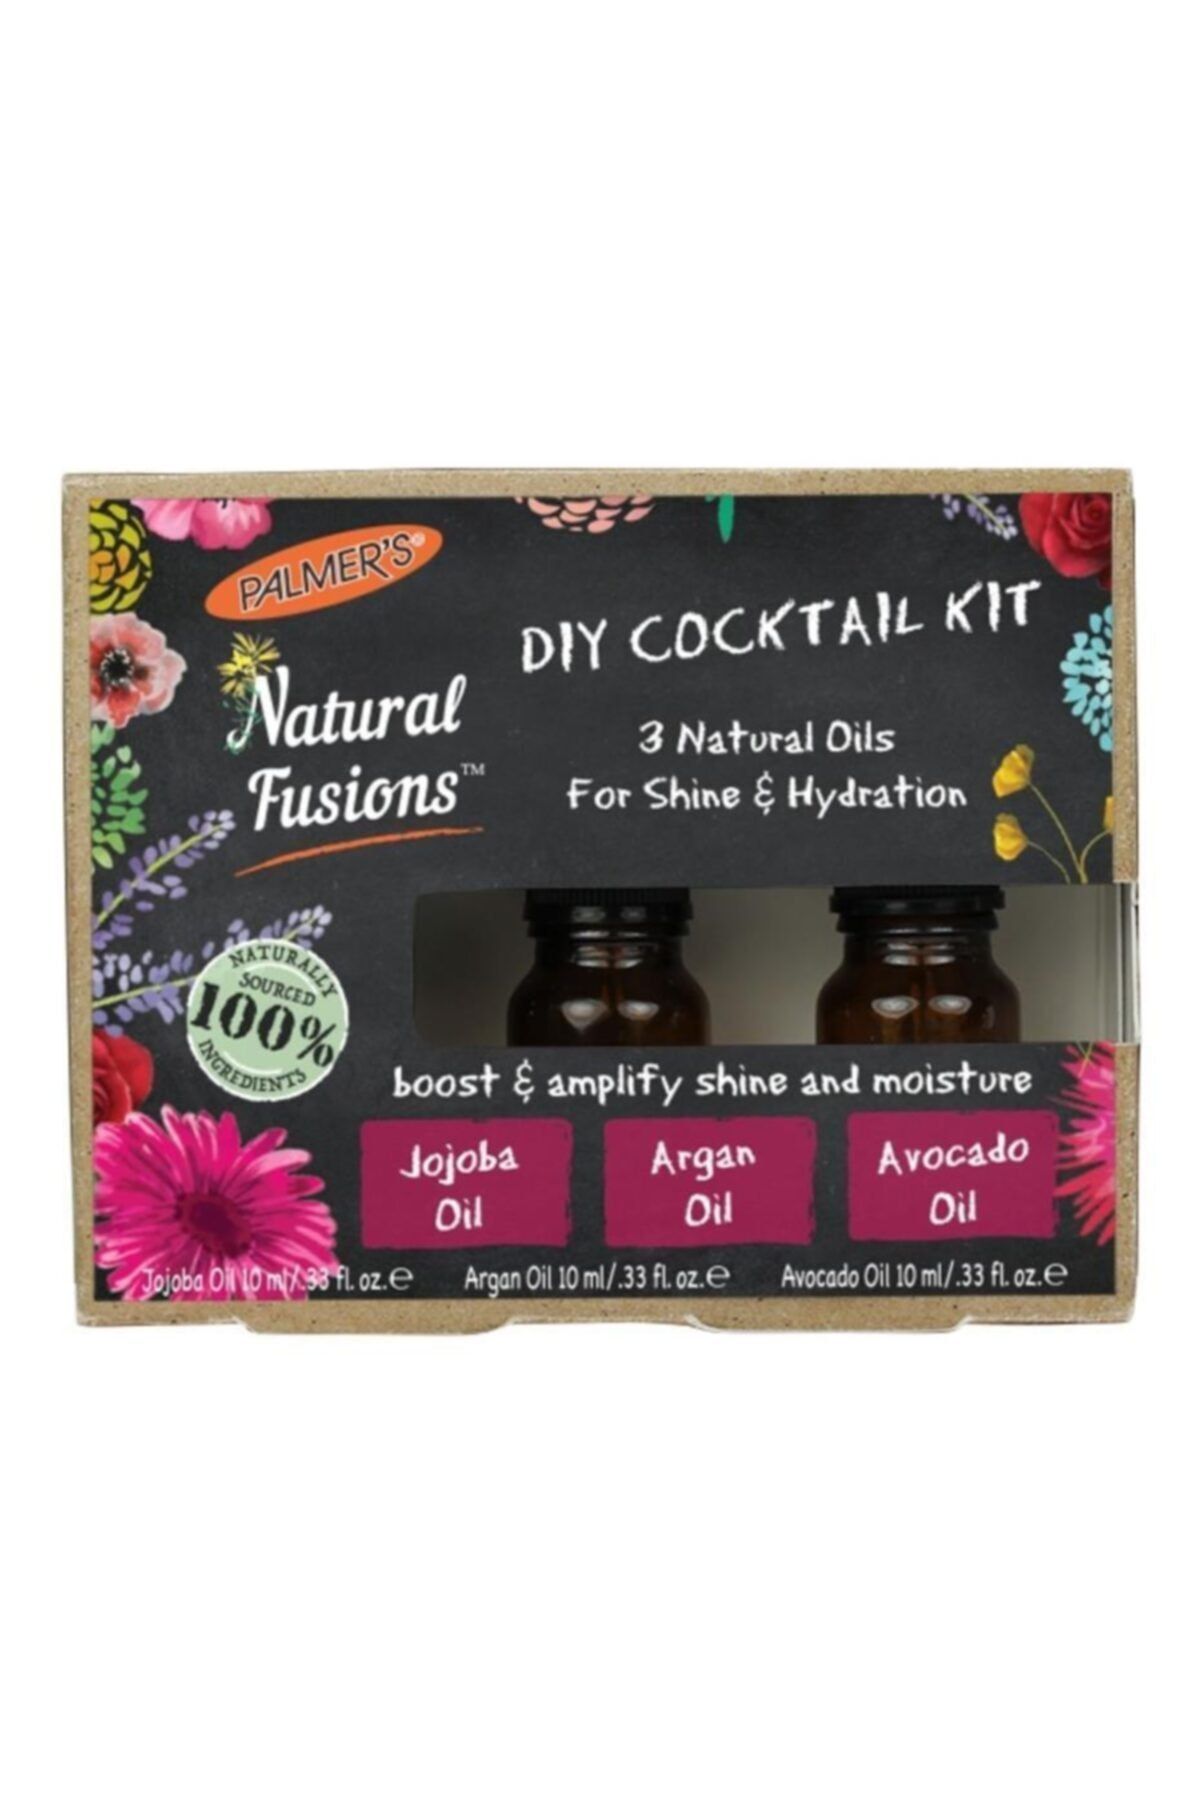 PALMER'S Natural Fusions Dıy Cocktail Kit Shine & Hydration